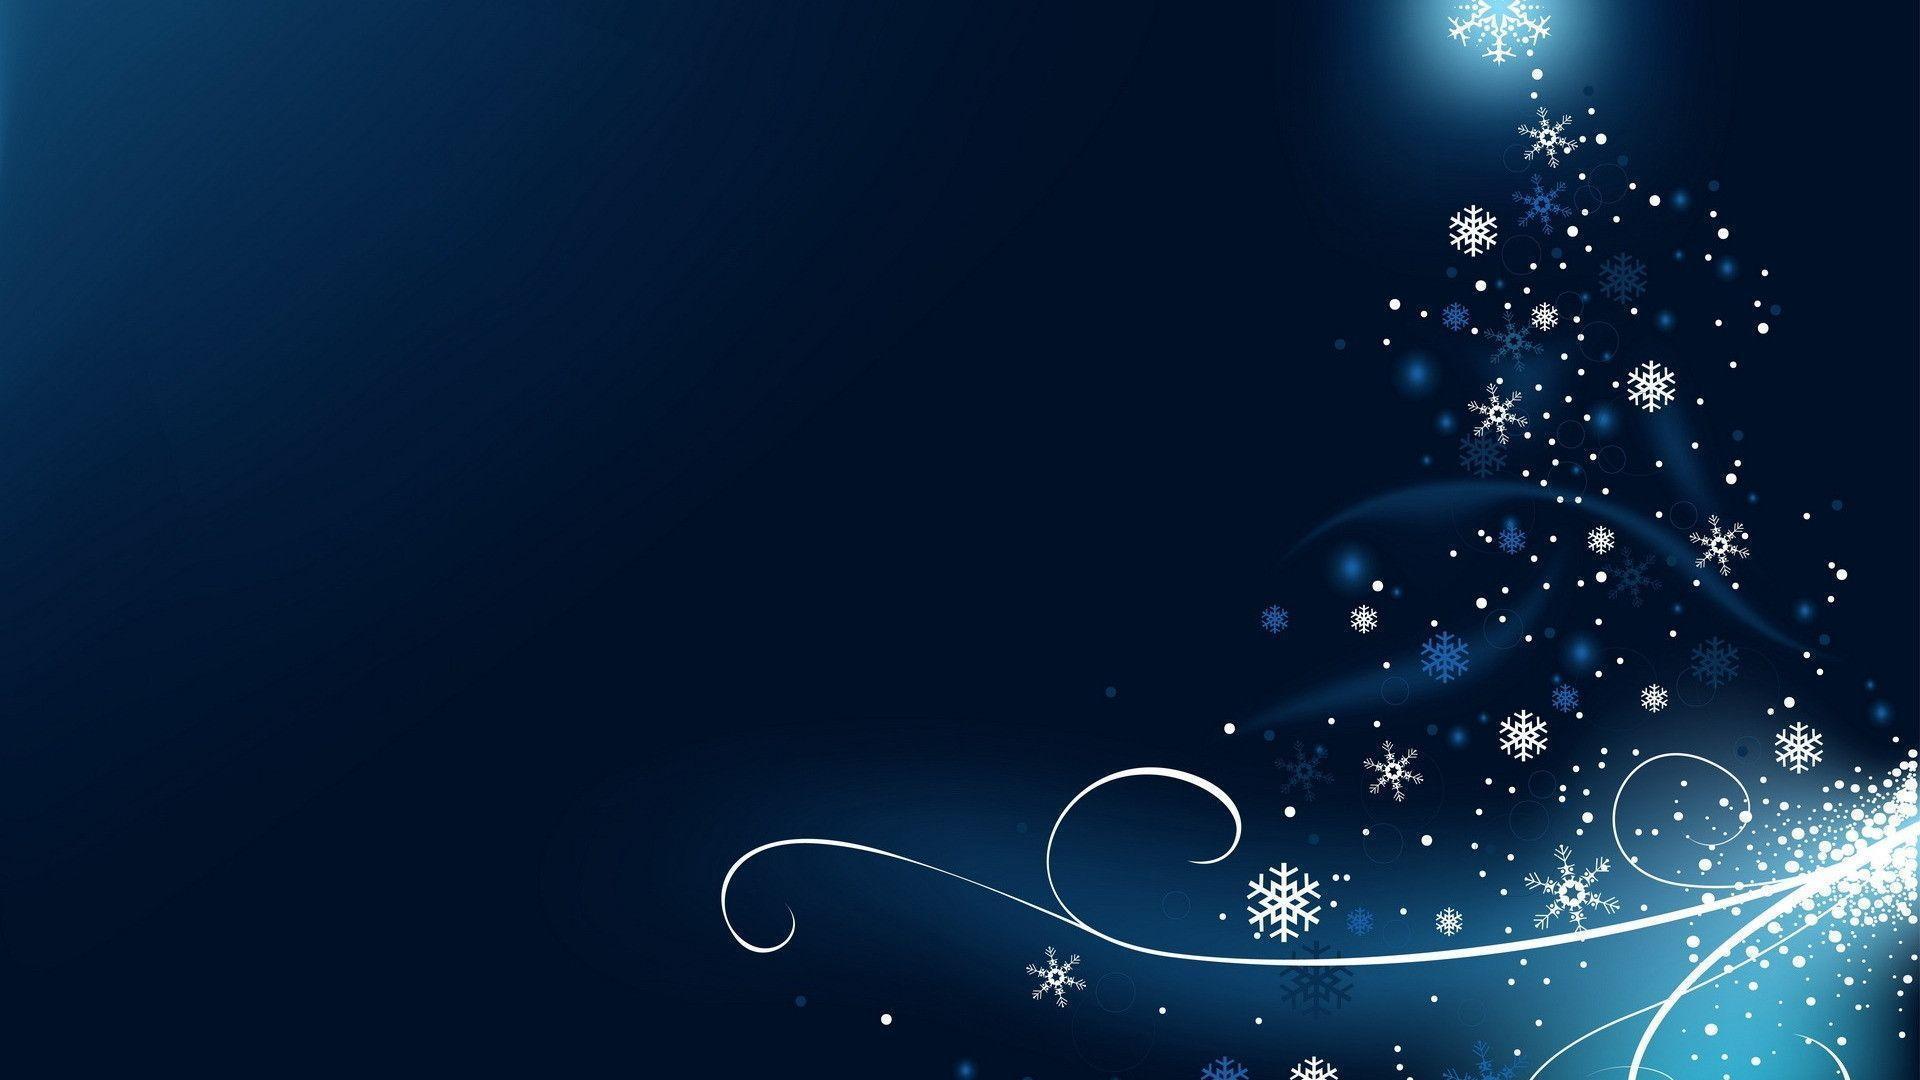 Snowflake Wallpaper Background 1 HD Wallpaper. Hdimges